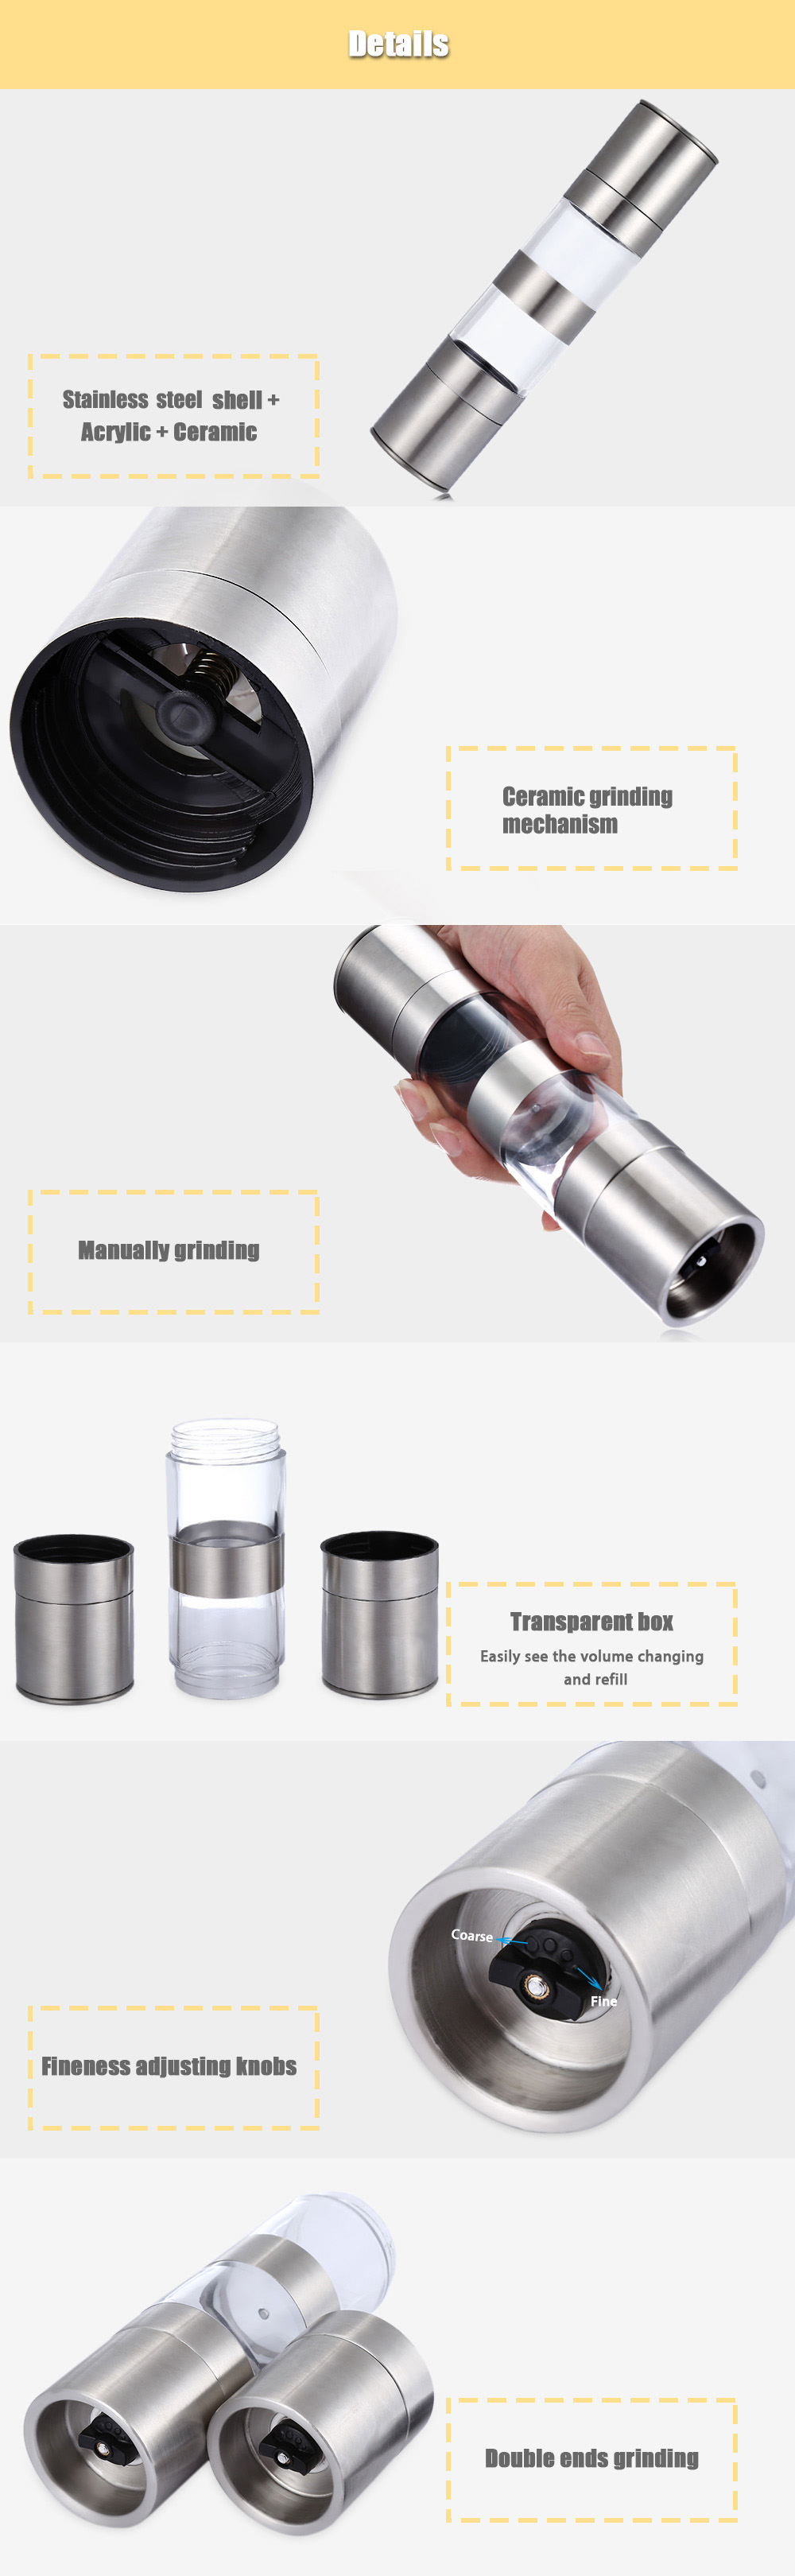 2 in 1 Manual Stainless Steel Pepper Salt Mill Grinder Kitchen Tool